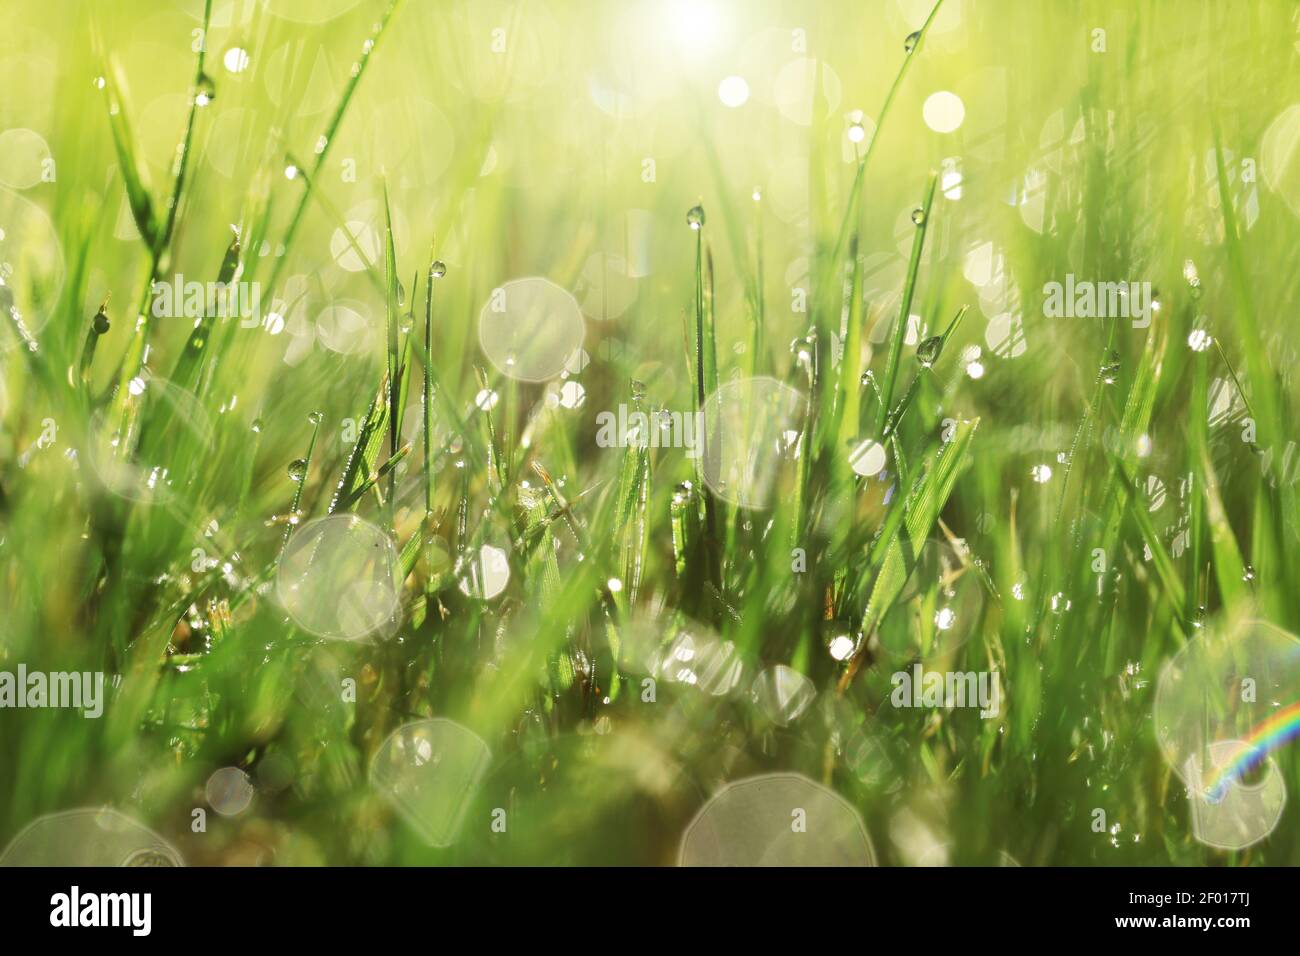 Earth Day. Ecological . Grass stems with water drops in the sun.spring grass background. bright green grass with water drops. natural backgrounds with Stock Photo